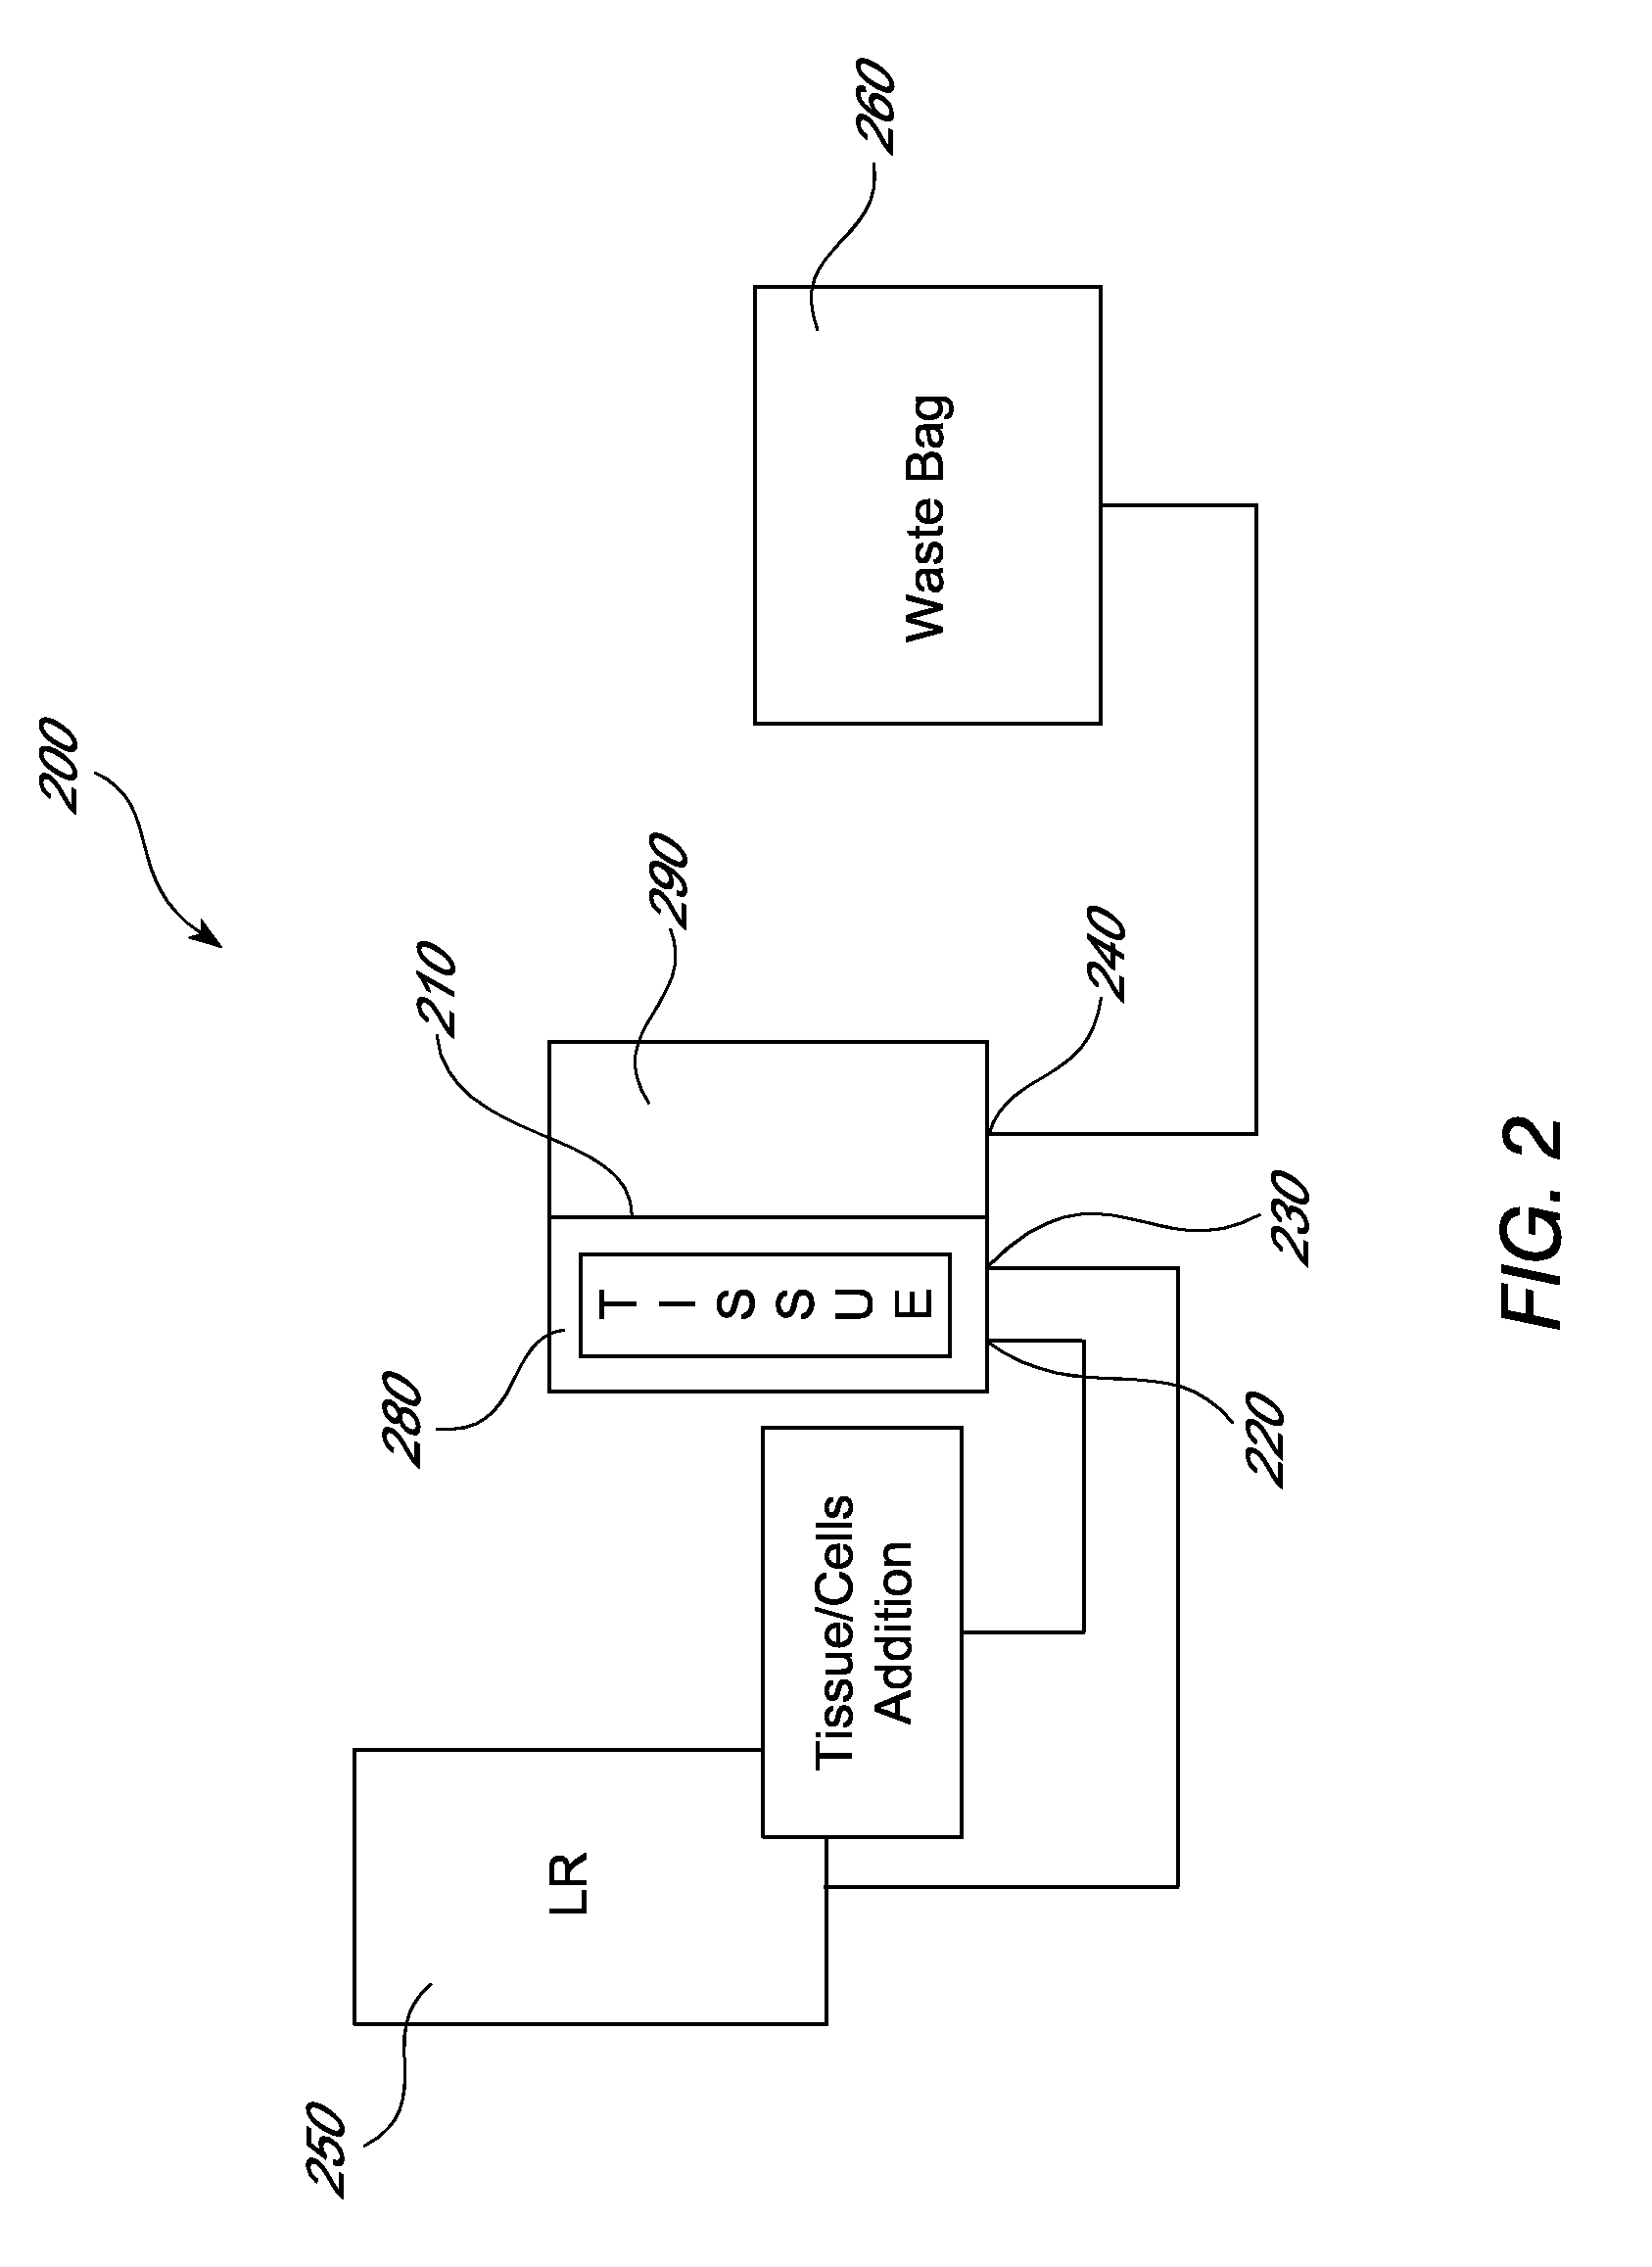 Systems, methods and compositions for optimizing tissue and cell enriched grafts